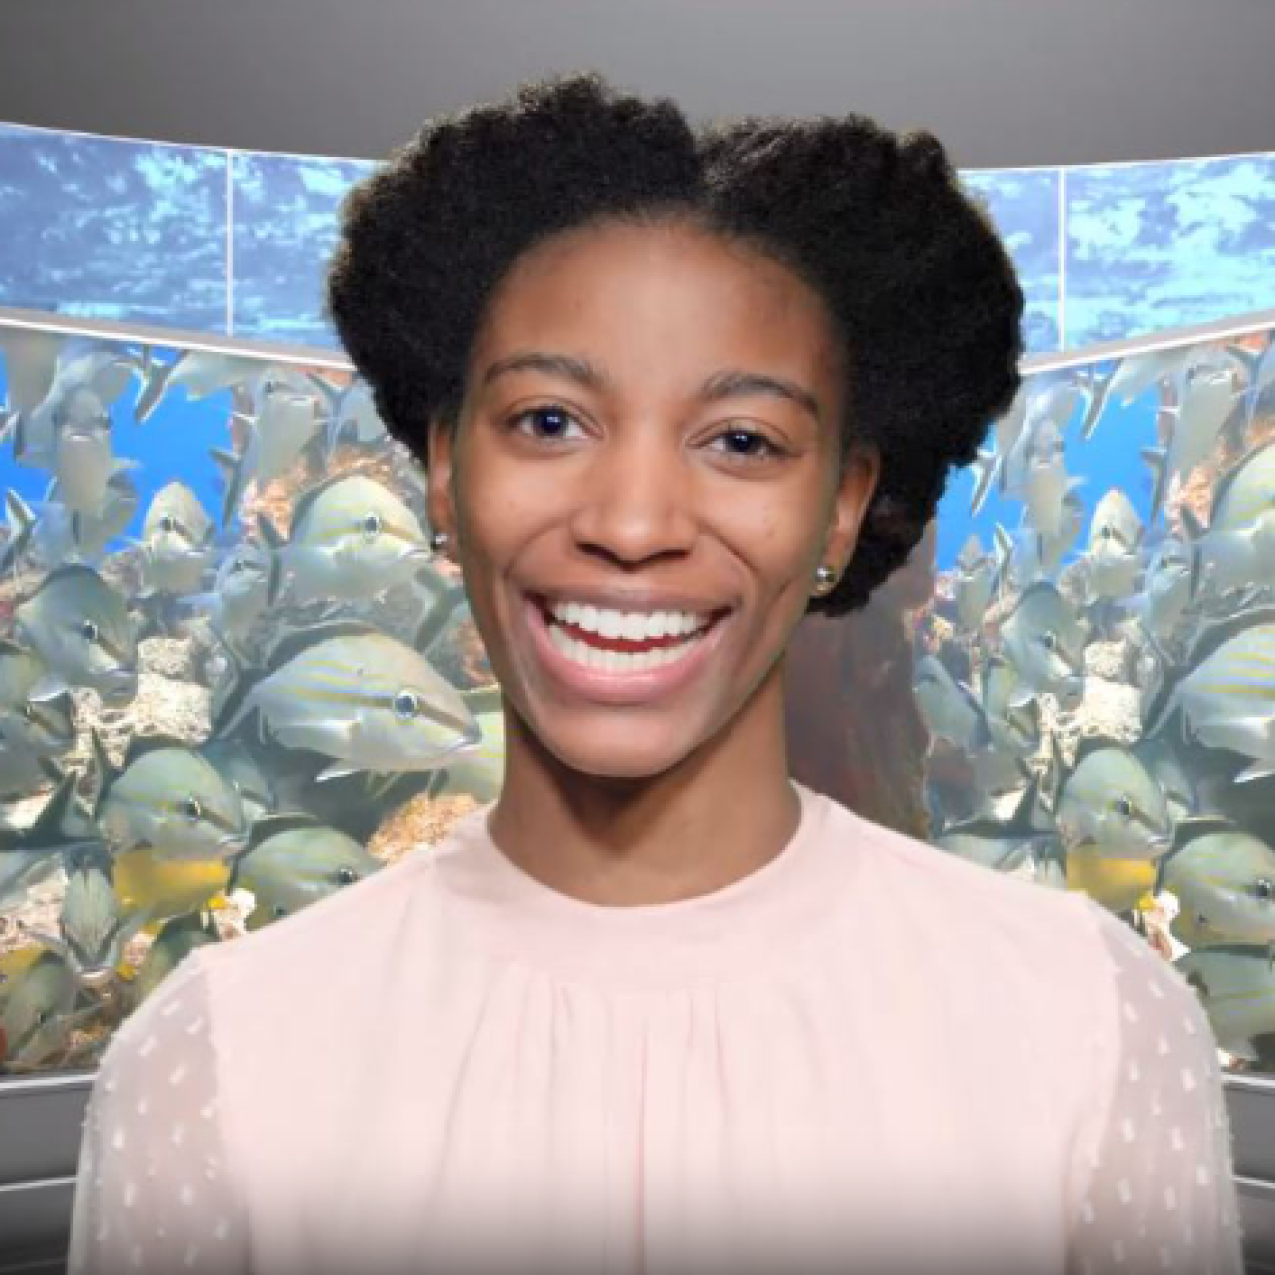 Symone (Johnson) Barkley smiles into the camera with a photo of a large school of fish behind her. Text: Introduction - The Ocean We love. We love the ocean and we know you do too. Join Symone Johnson as she gives us a ninety second tour of our Earth Day collection.